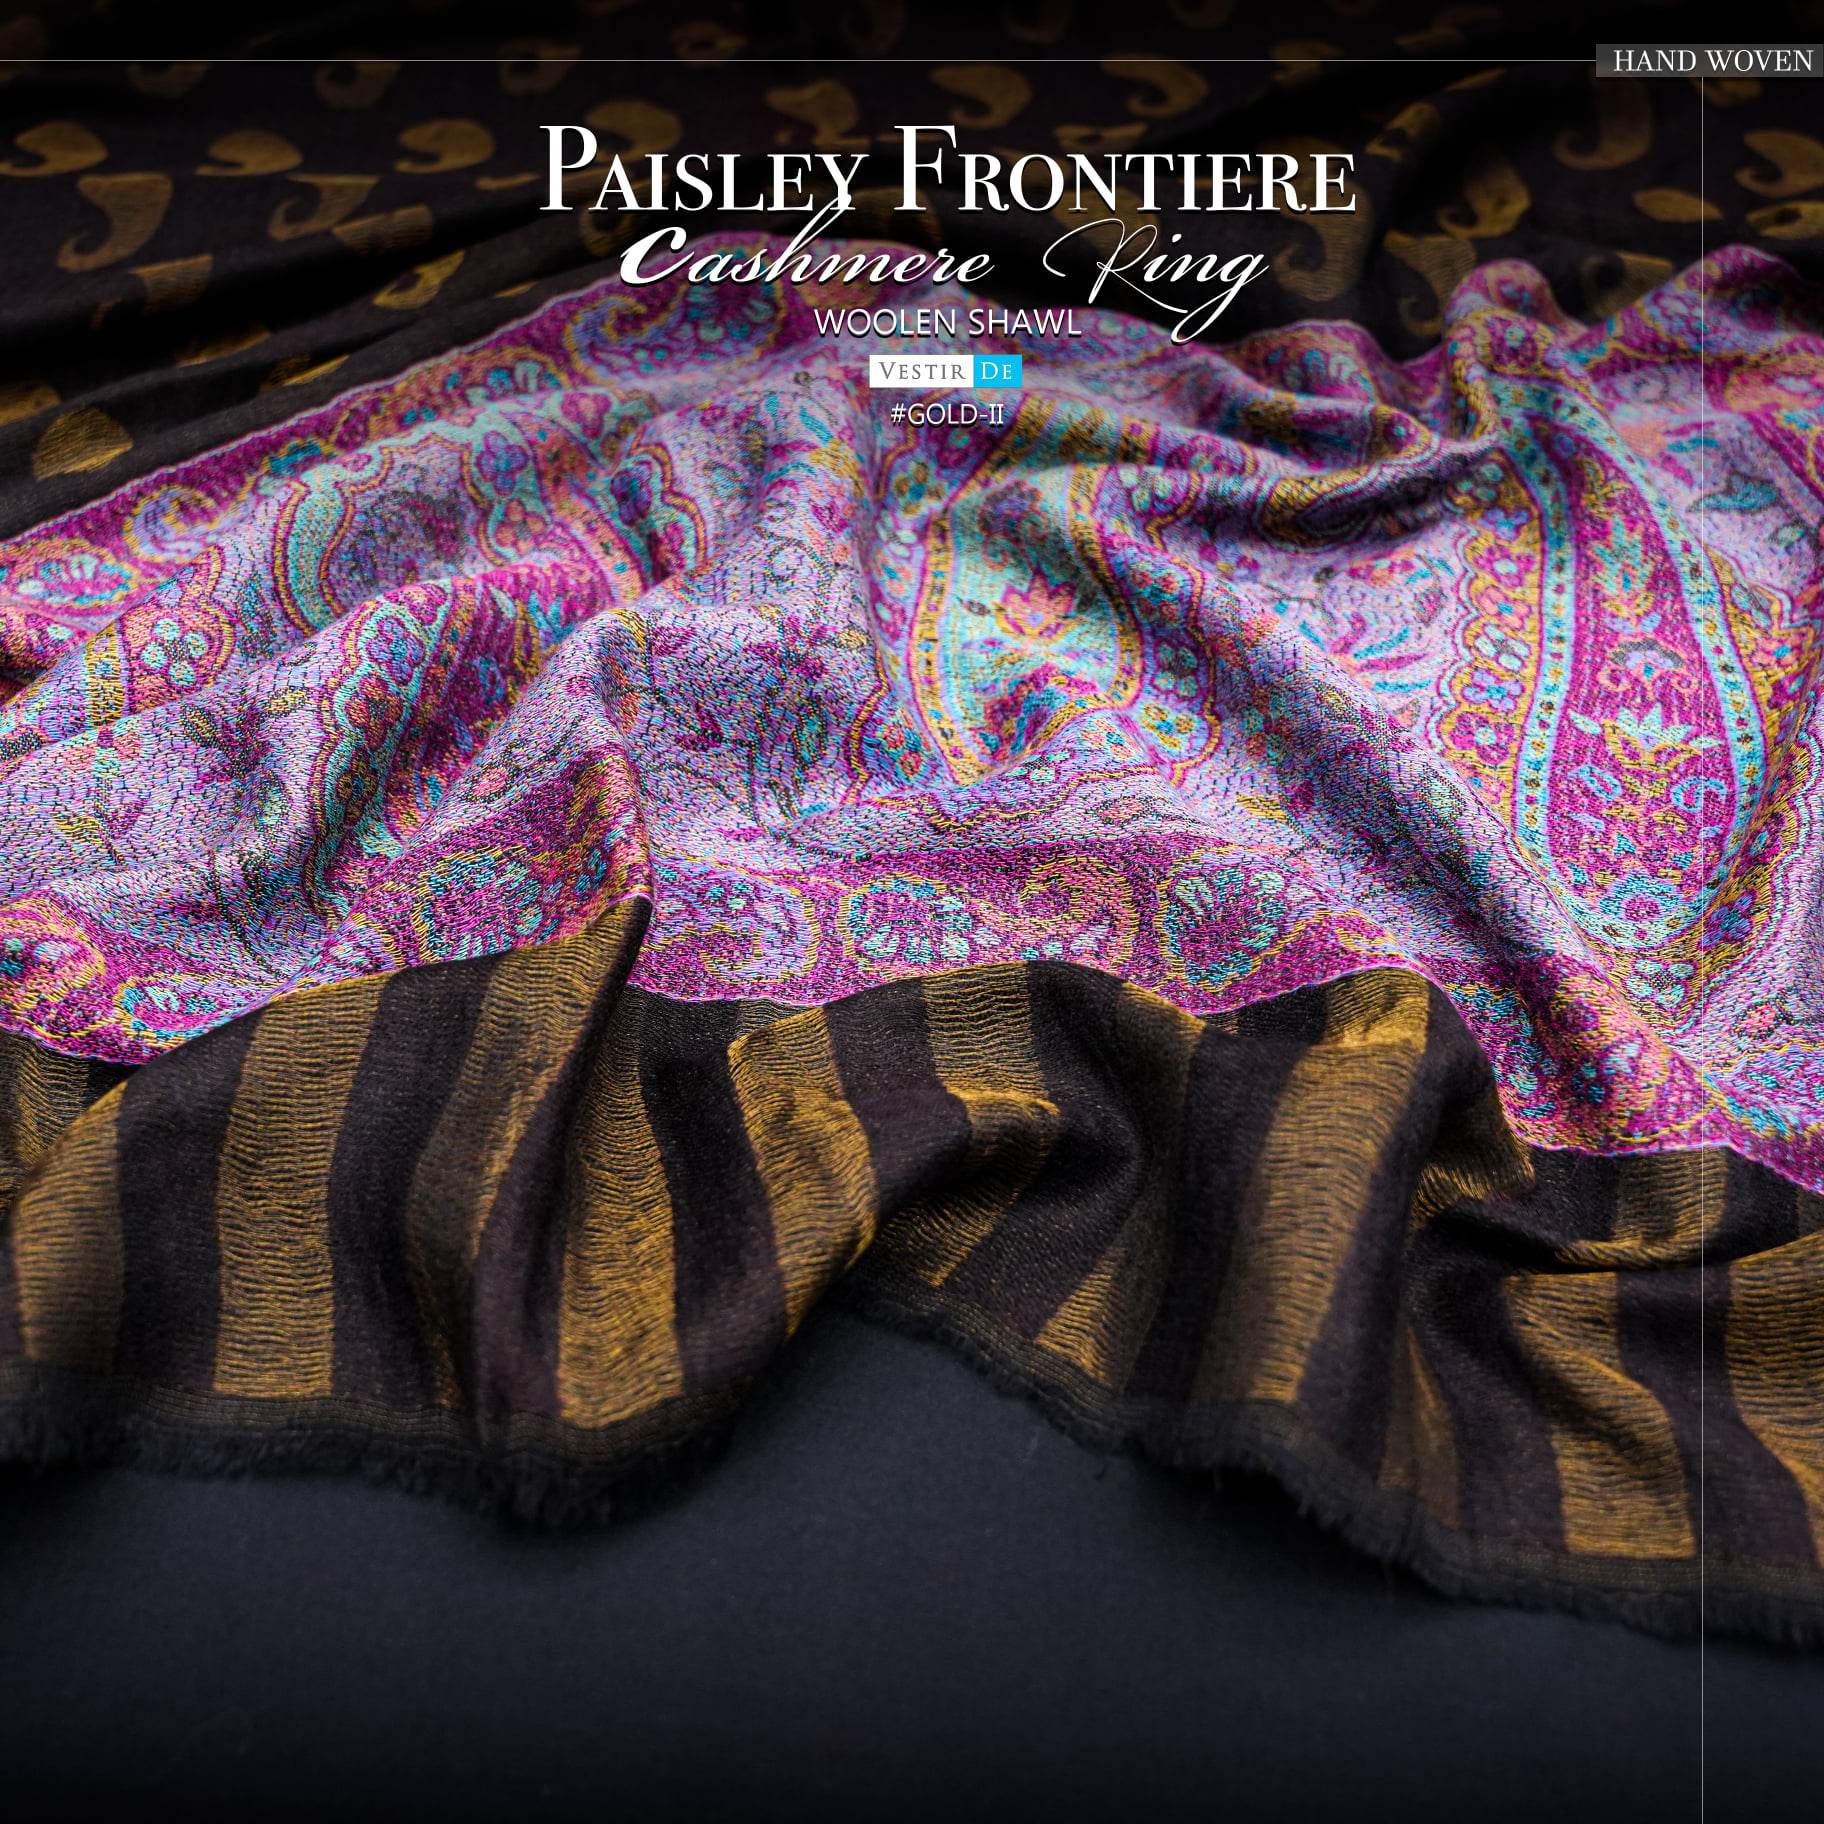 Paisley Frontiere Cashmere Ring Woolen Shawl Gold II